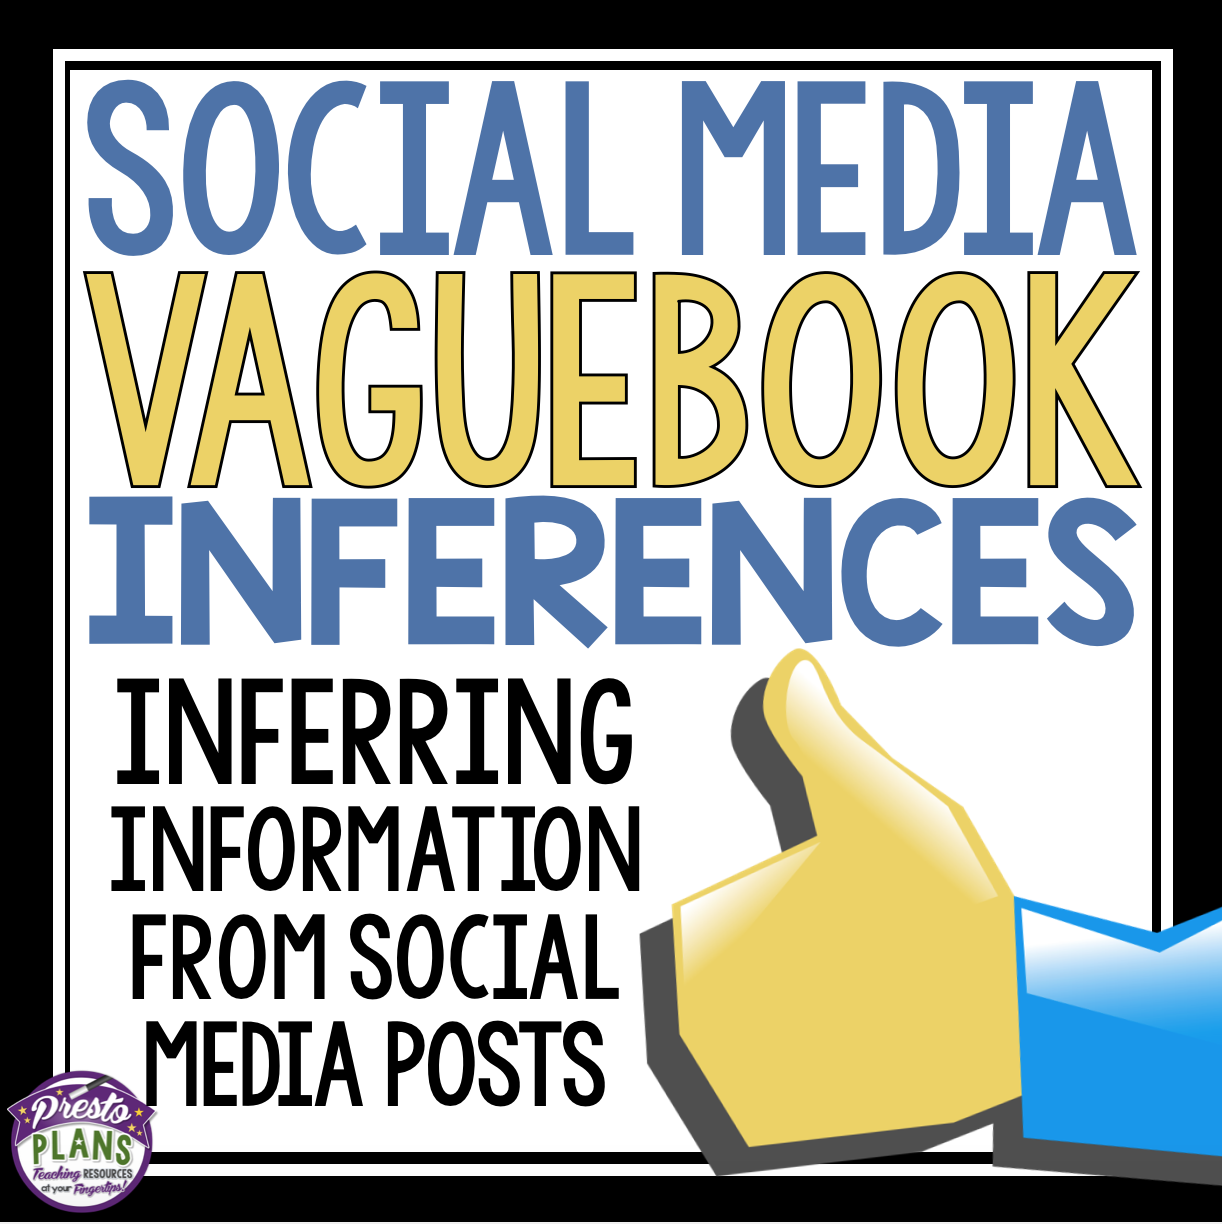 vaguebook inference activity